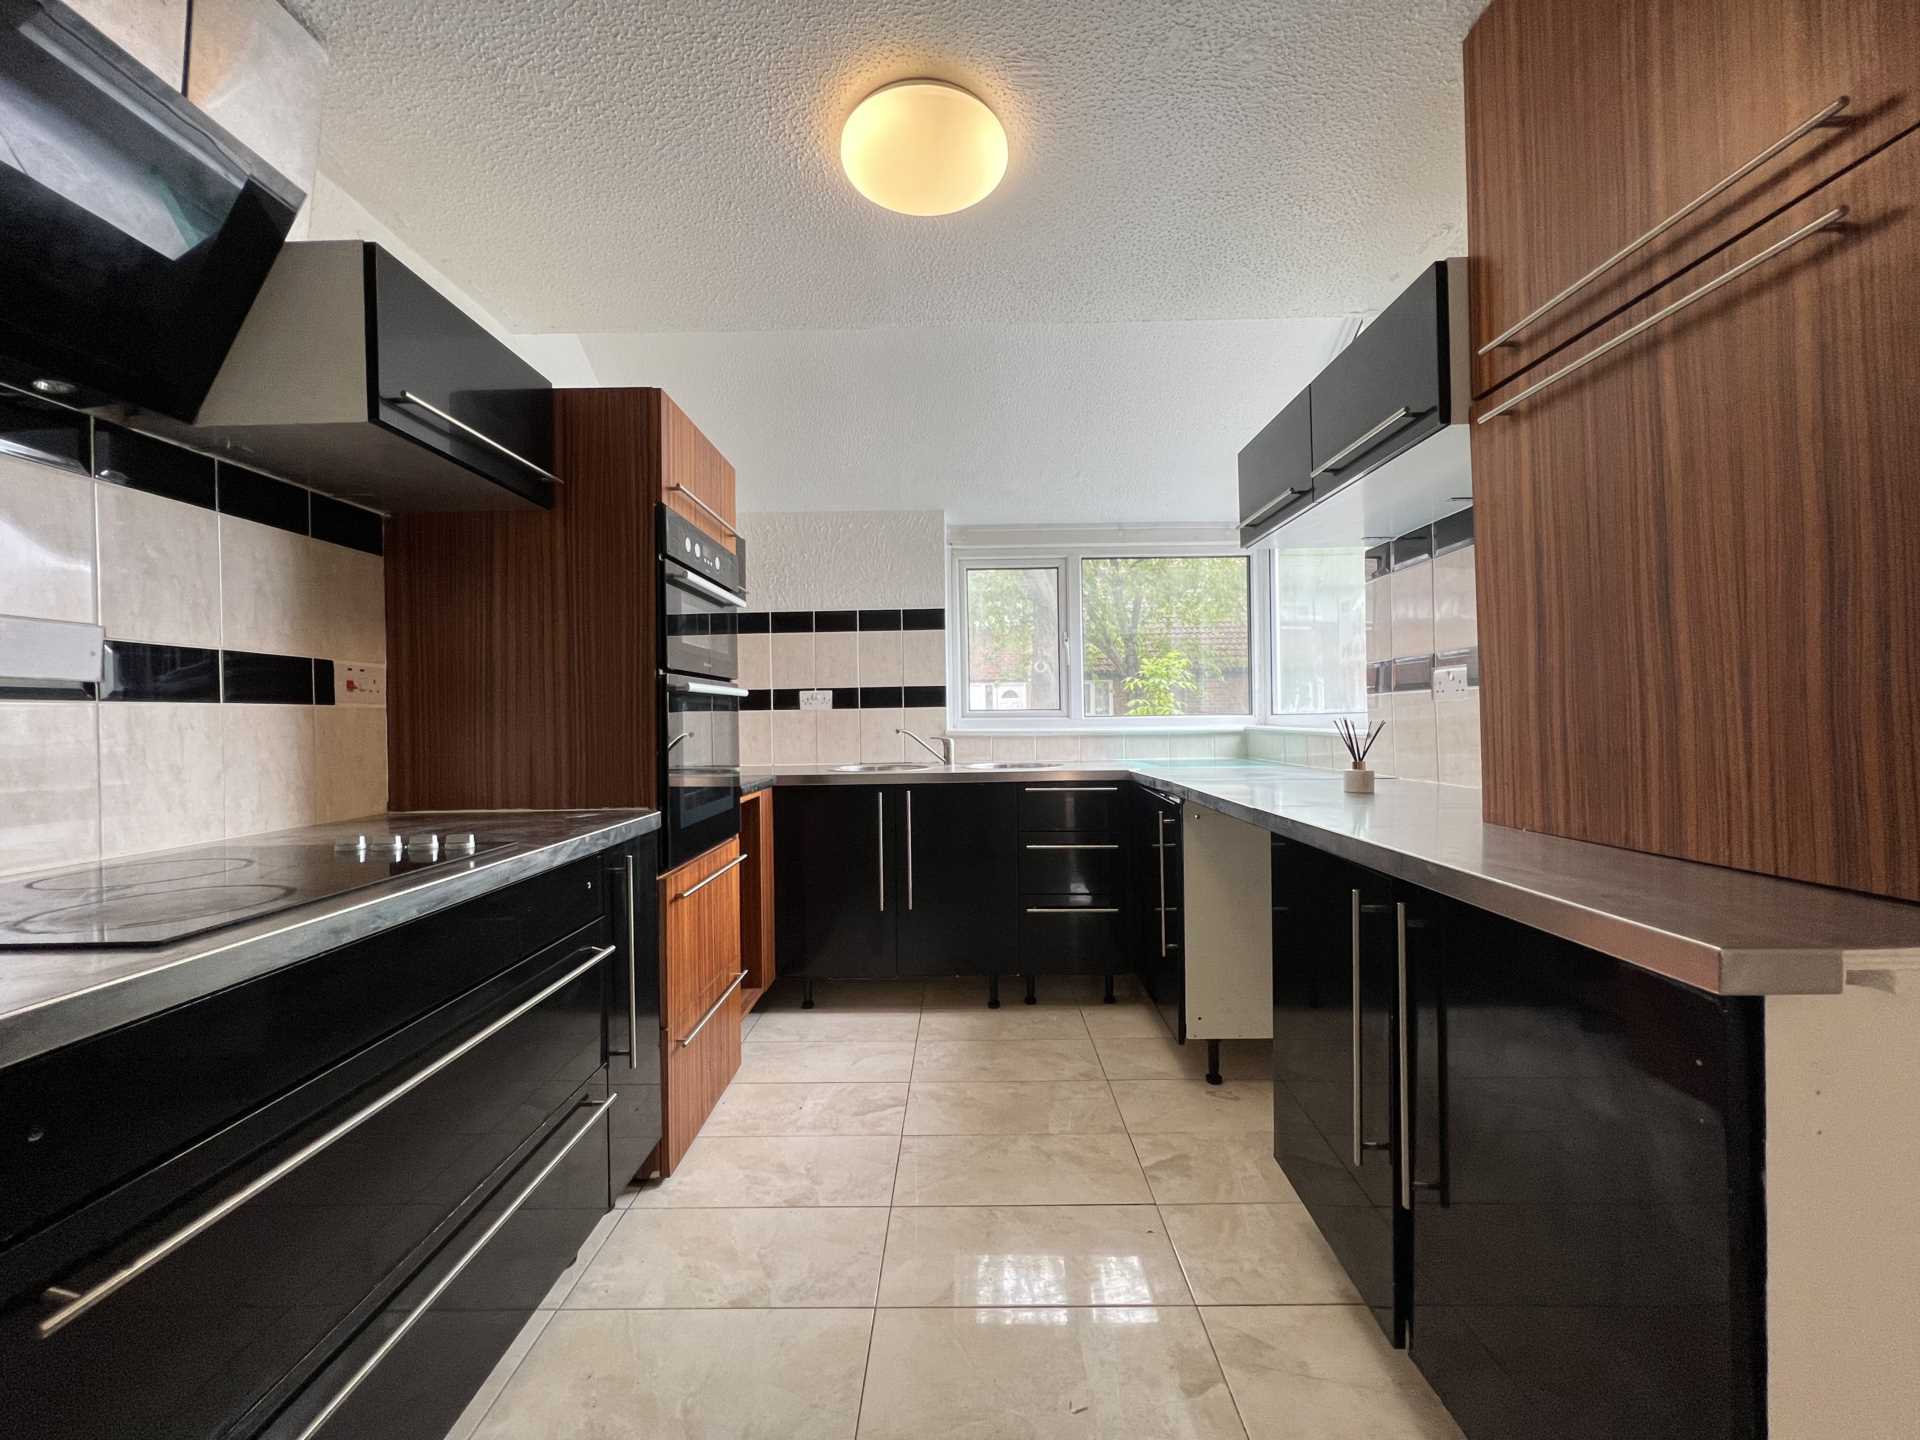 AISHER ROAD SE28 8LH    * VIDEO & 3D FLOORPLAN AVAILABLE *, Image 4